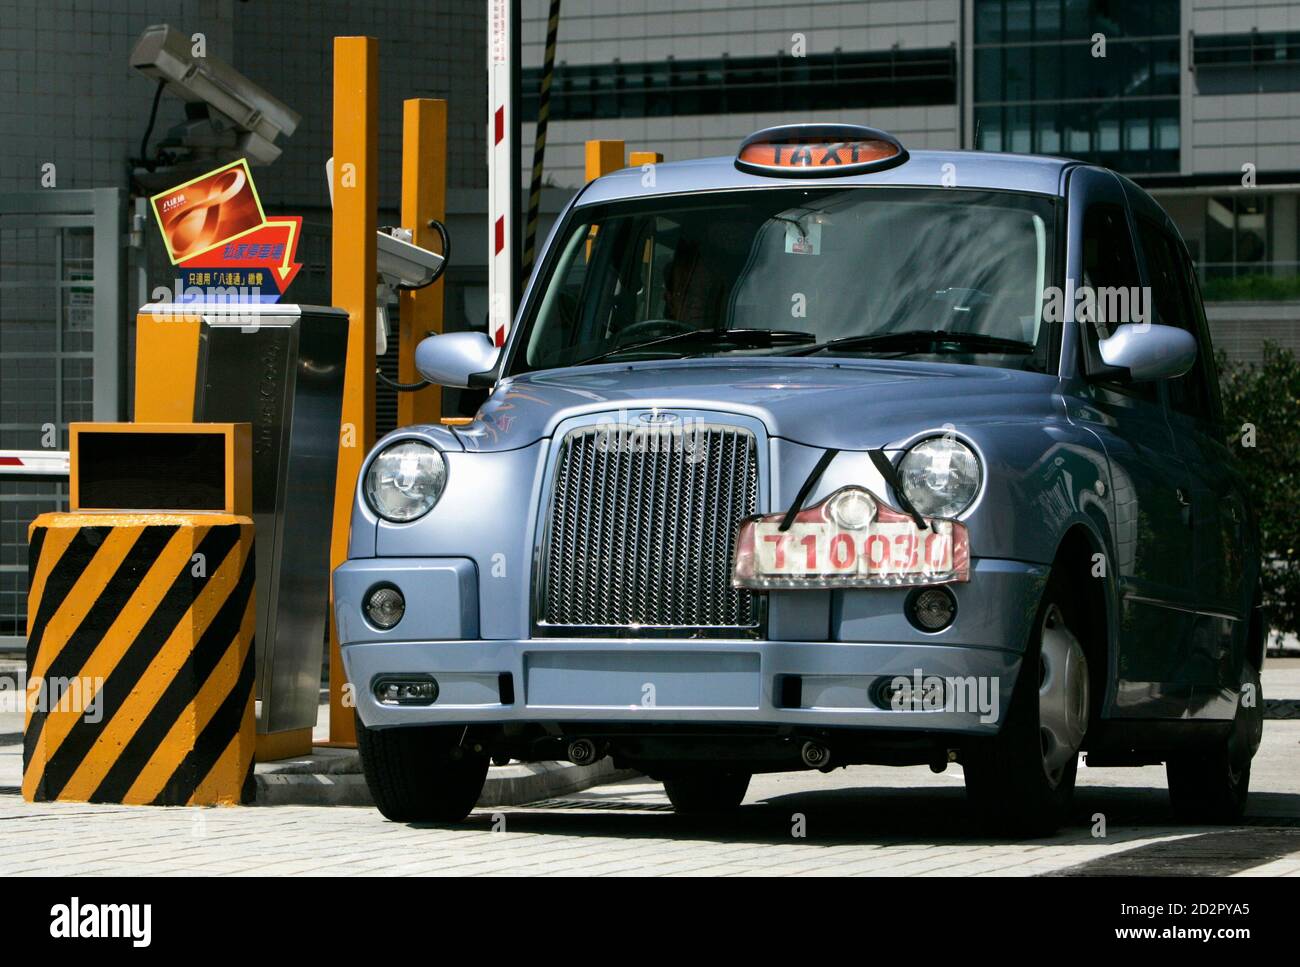 The new TX4 taxi, which was manufactured LTI Ltd, a car park in Hong Kong May 29, 2007. Geely Automobile Holdings Limited, which bought LTI's parent company Britain's Manganese